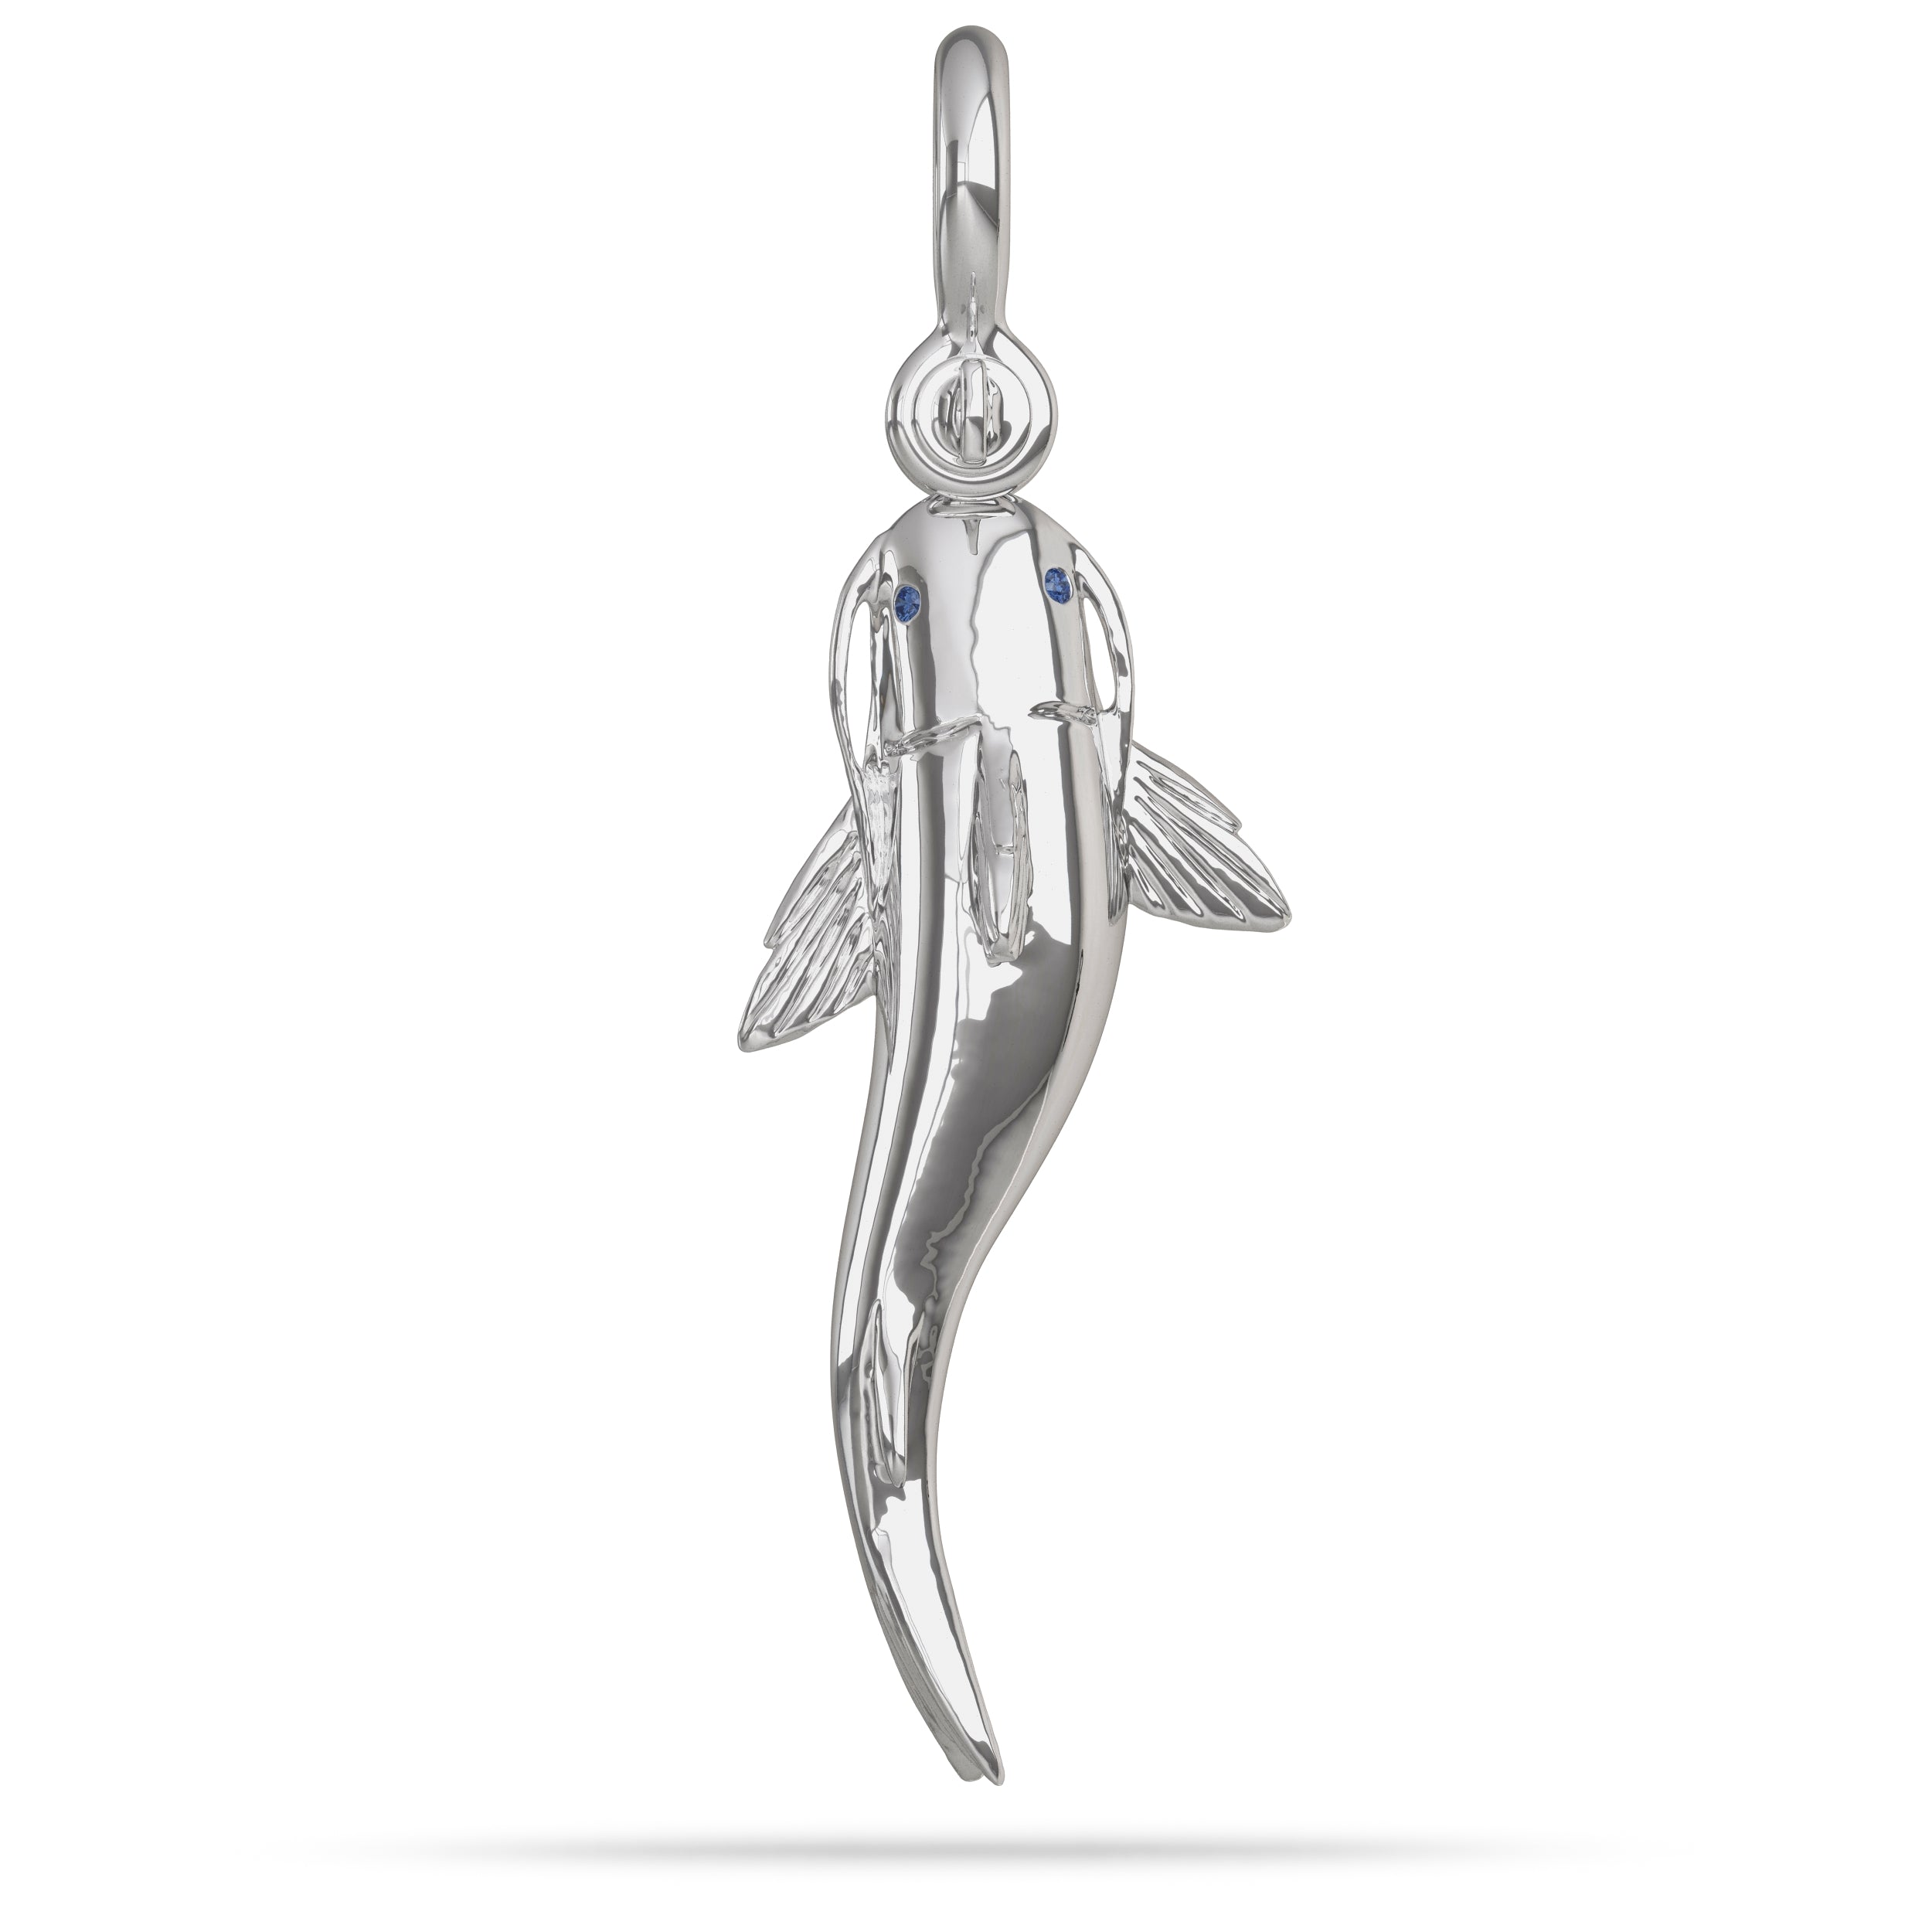 Sterling Silver Catfish  Pendant High Polished Mirror Finish With Blue Sapphire Eye with A Mariner Shackle Bail Custom Designed By Nautical Treasure Jewelry In The Florida Keys Noodling Hanna